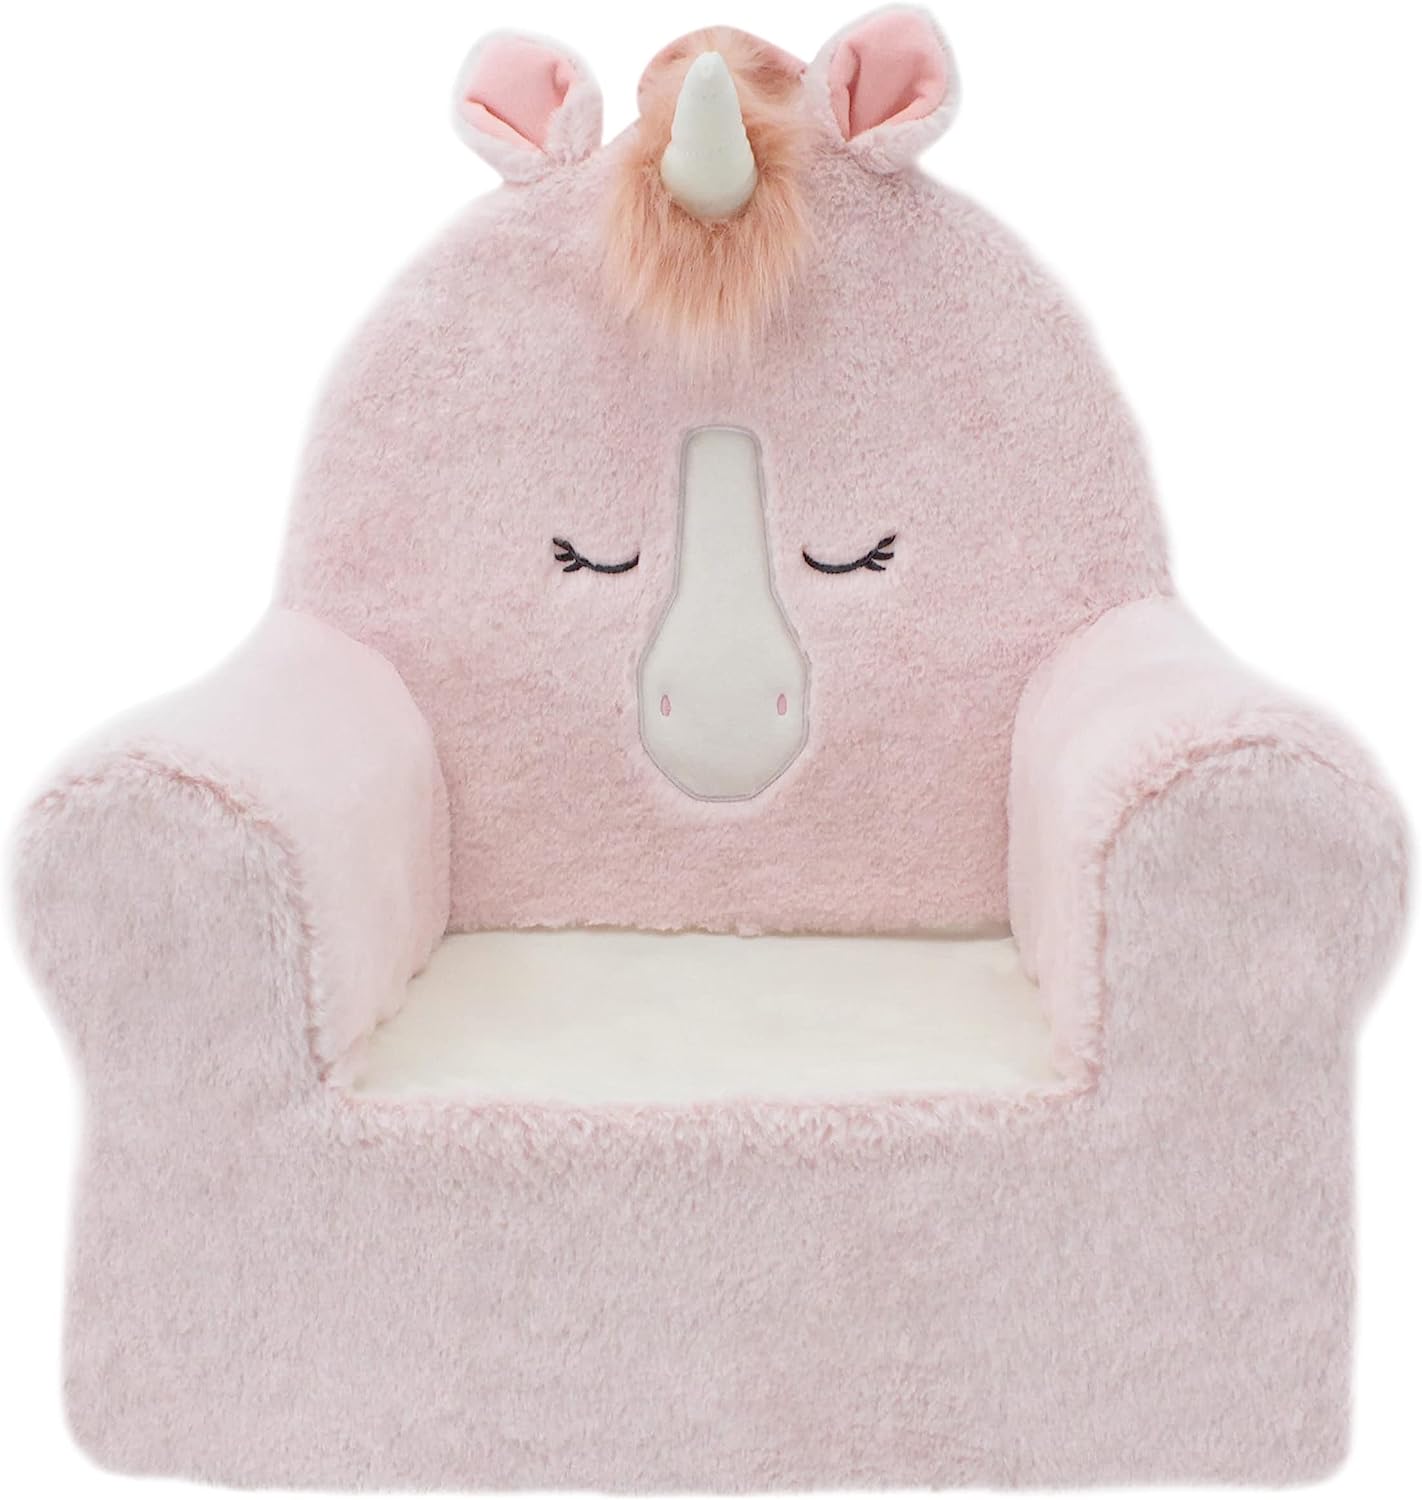 Soft Landing Sweet Seats Premium Character Chair with Carrying Handle & Side Pockets (Light Pink Unicorn) $22.74 + Free Shipping + Free Shipping w/ Prime or on orders $25+